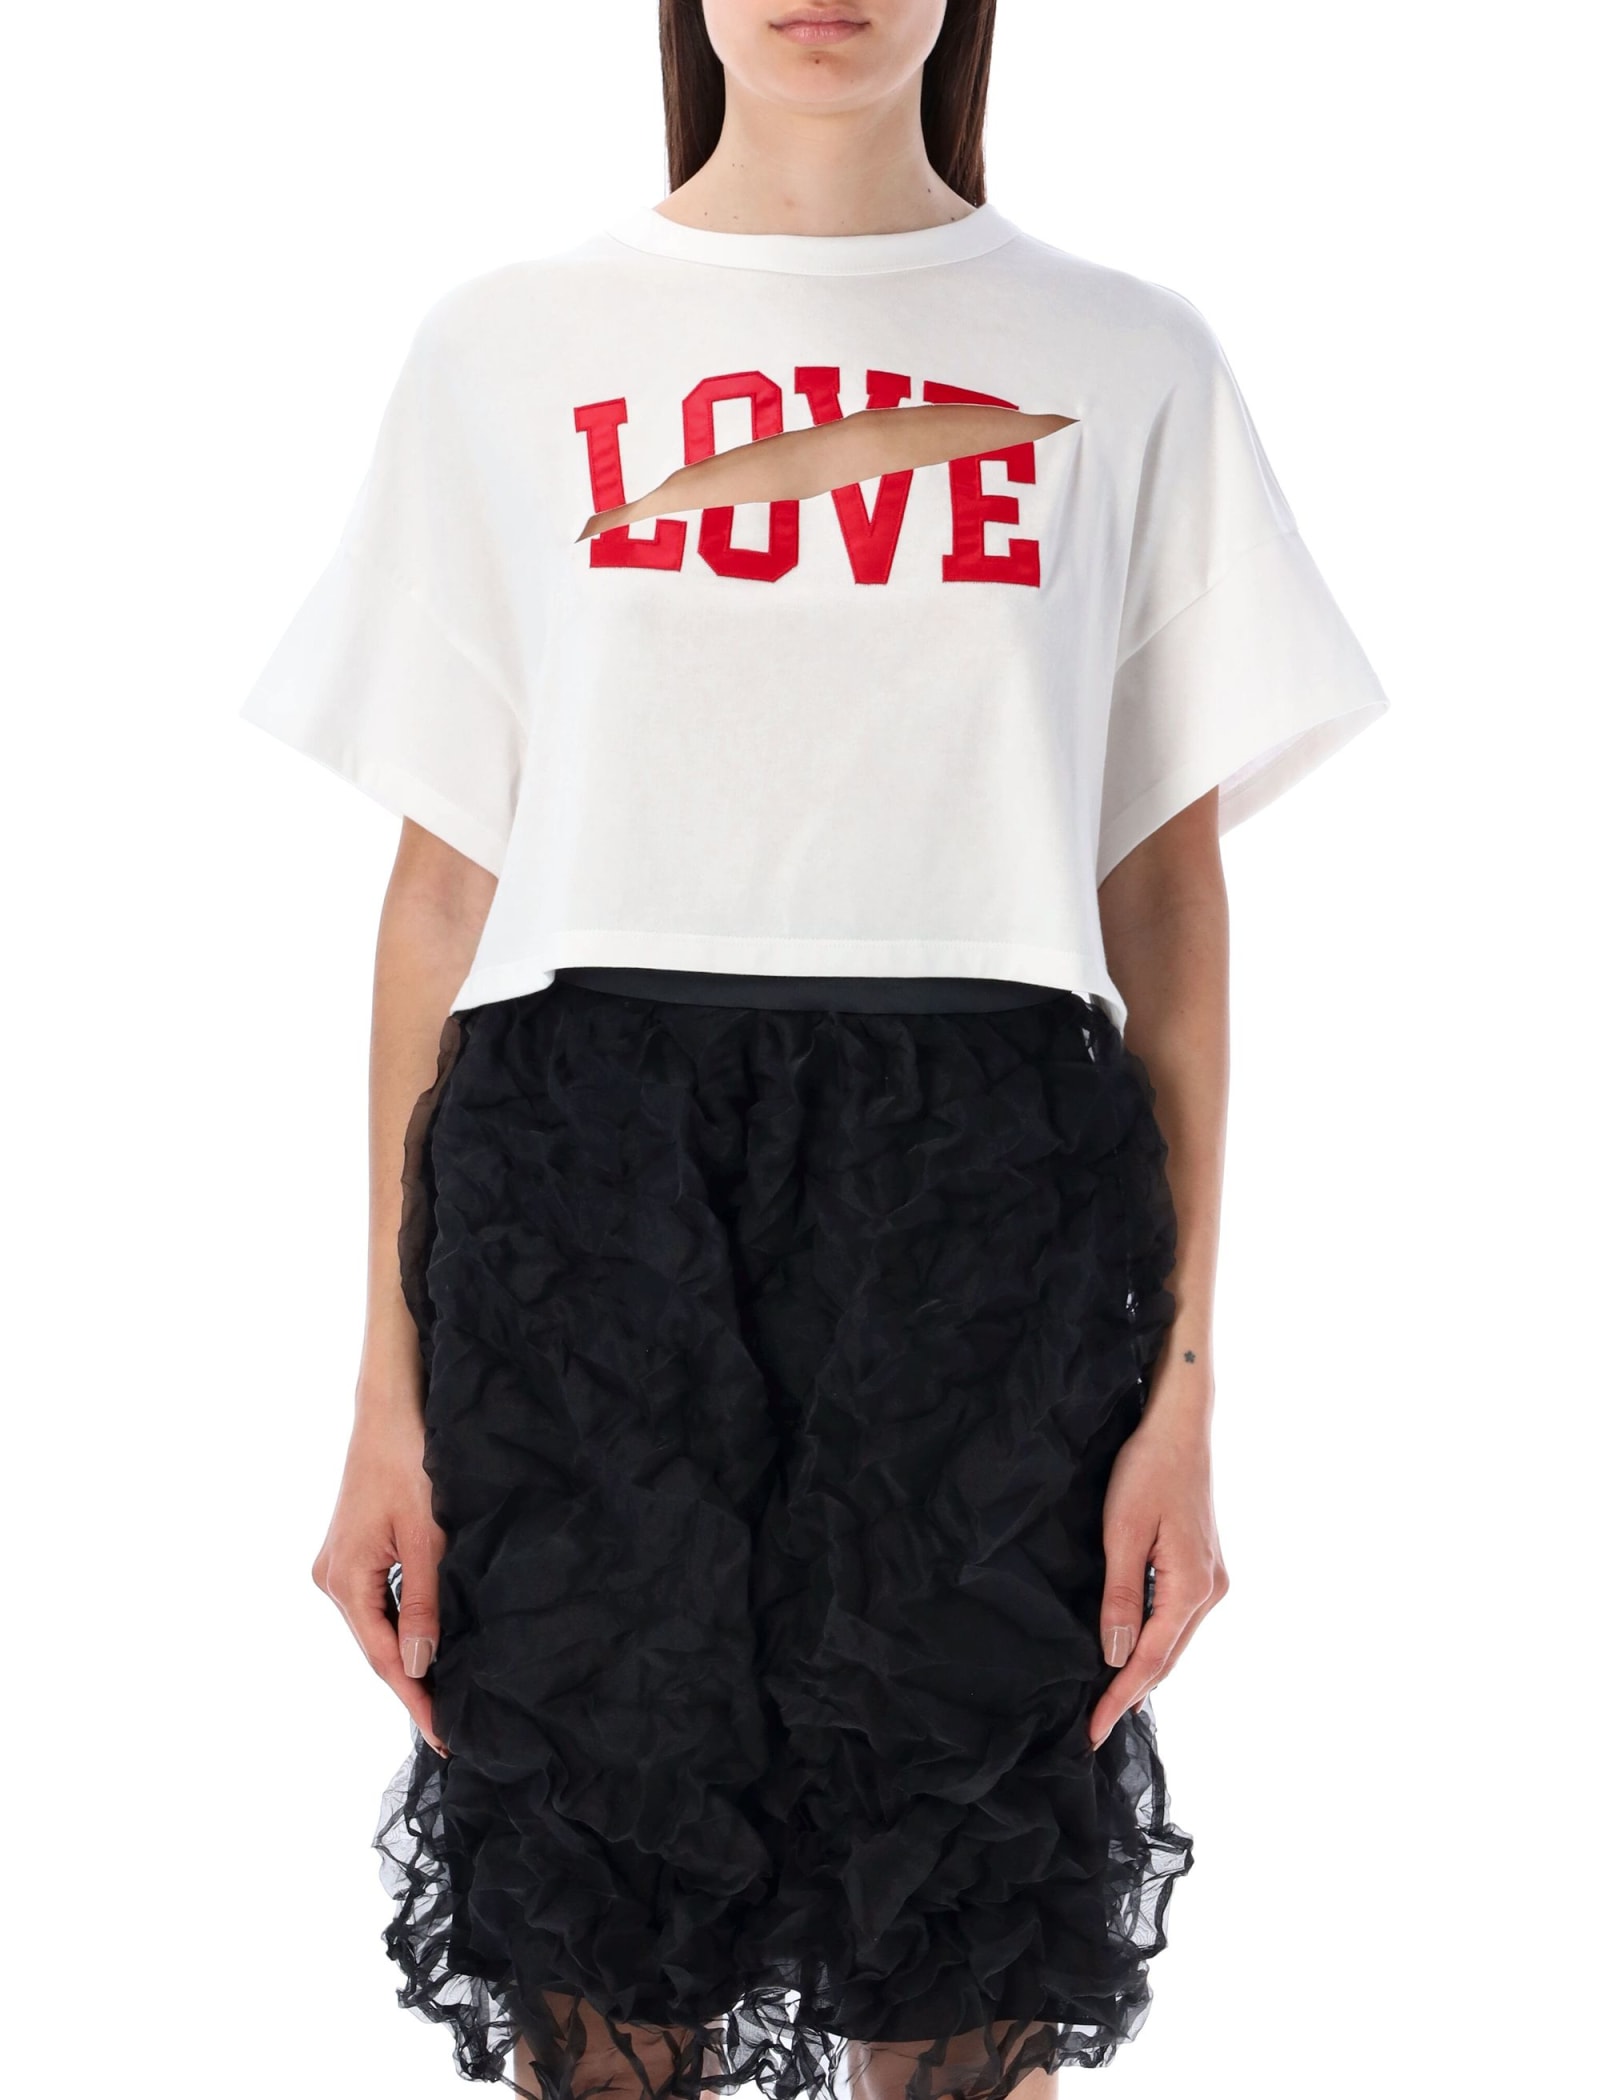 UNDERCOVER LOVE PATCH T-SHIRT